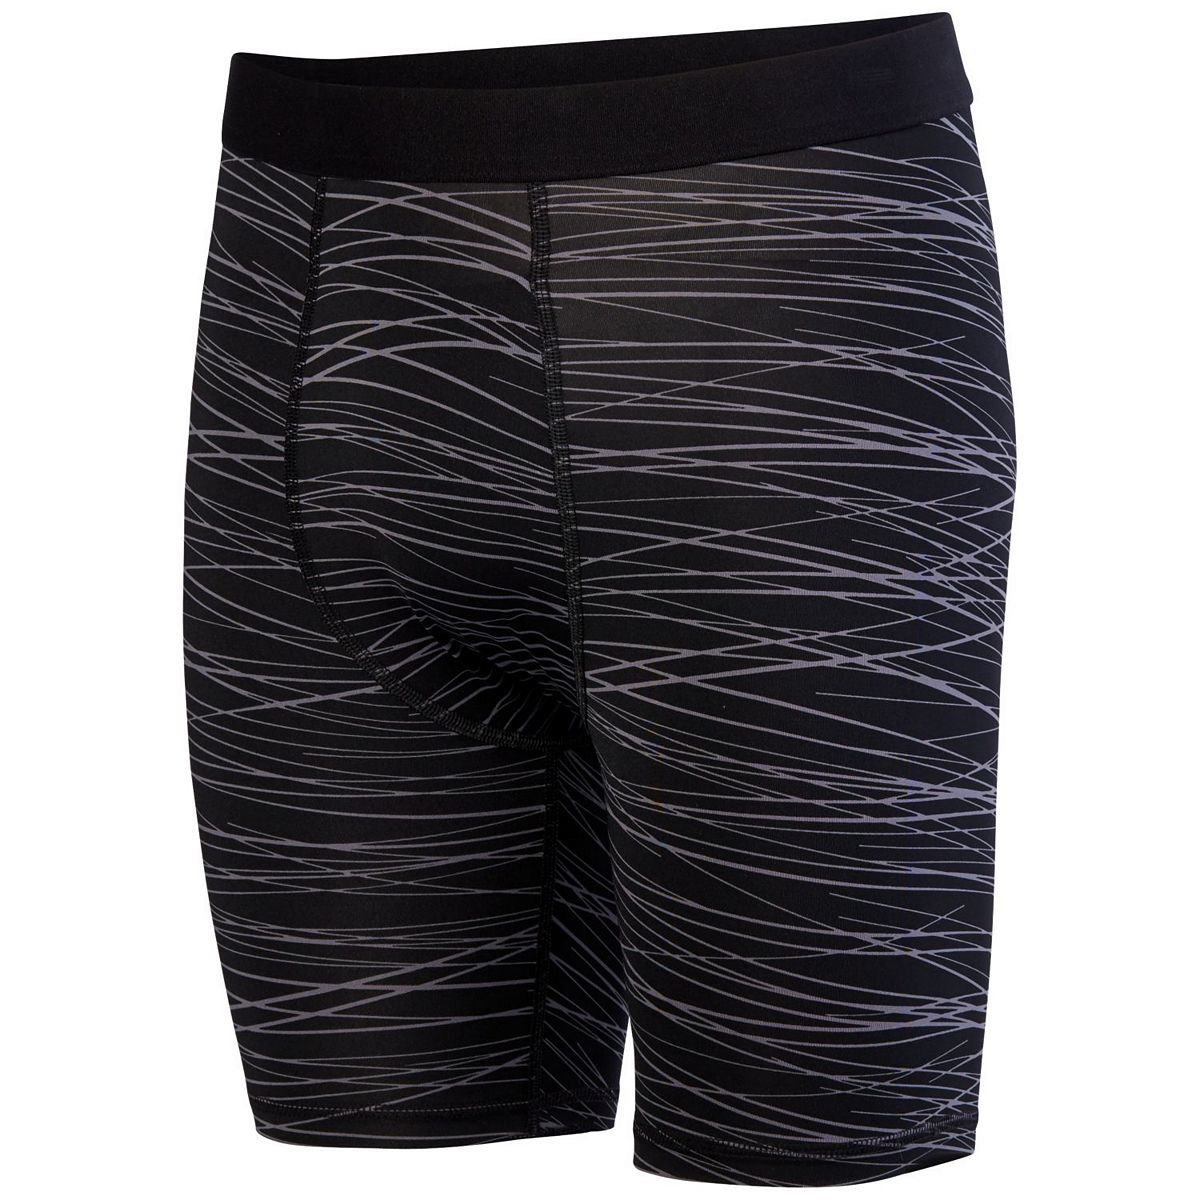 Augusta Sportswear Hyperform Compression Shorts in Black/Graphite Print  -Part of the Adult, Adult-Shorts, Augusta-Products product lines at KanaleyCreations.com